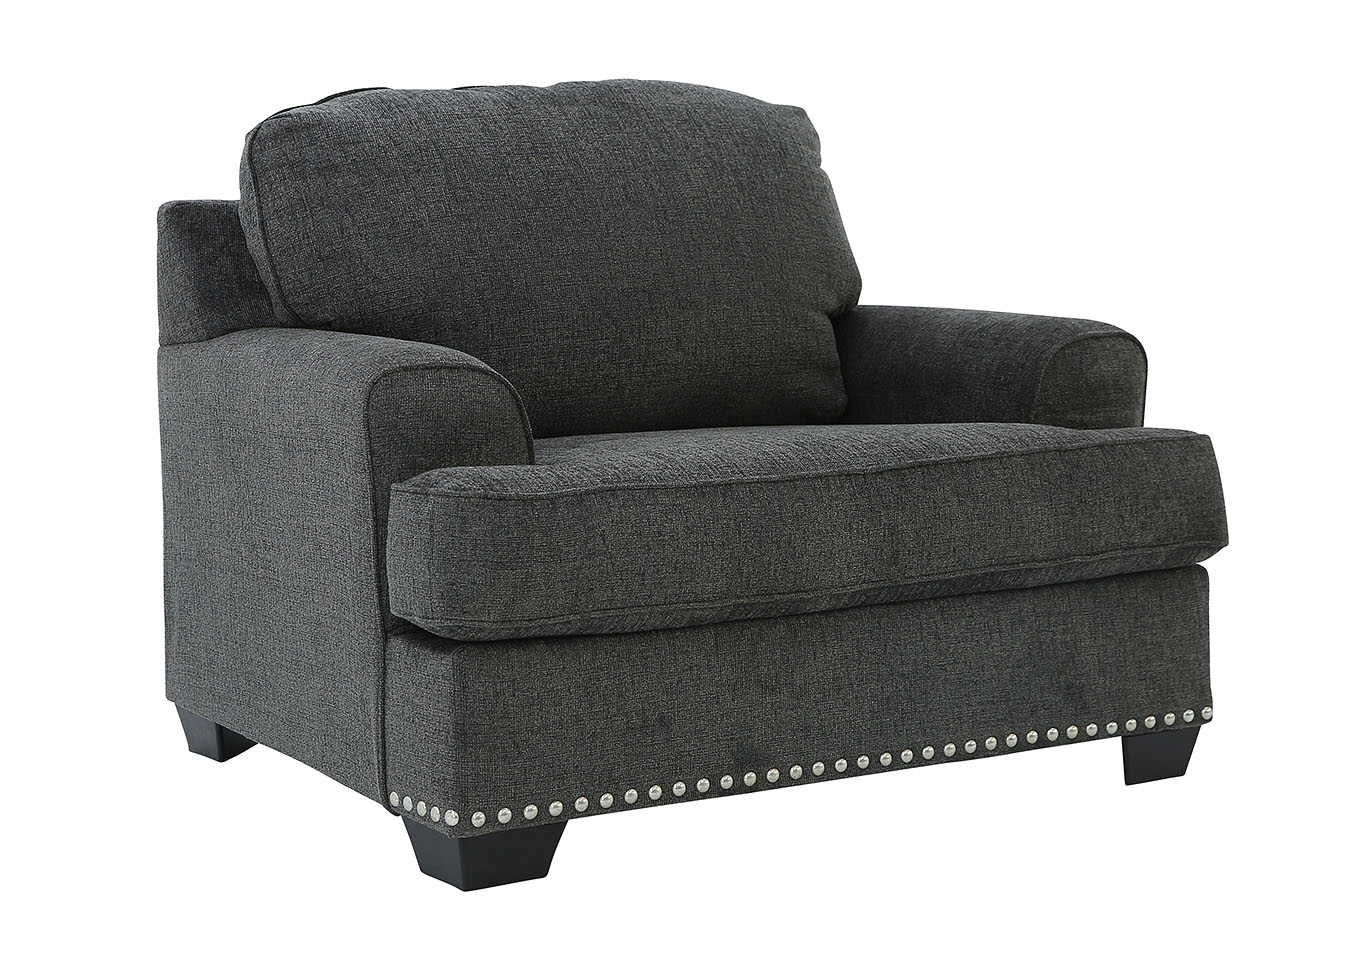 BACENO CARBON OVERSIZED CHAIR,ASHLEY FURNITURE INC.